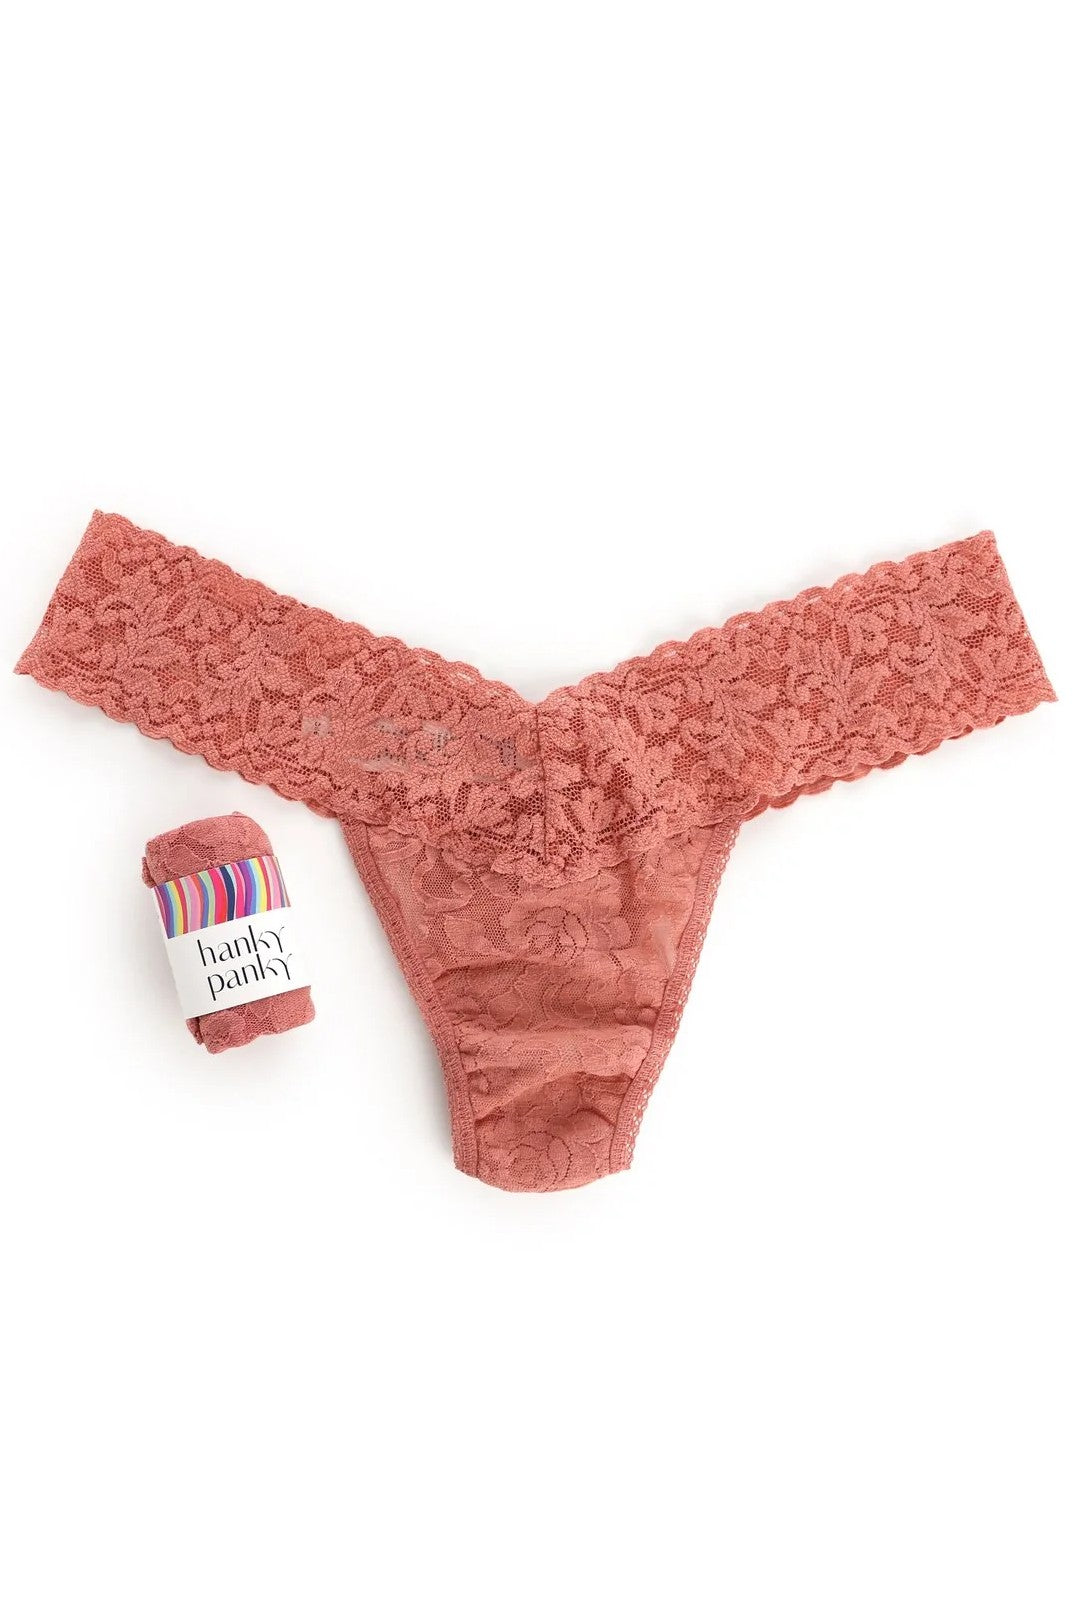 Signature Lace Low Rise Thong In Passionate Pink by Hanky Panky